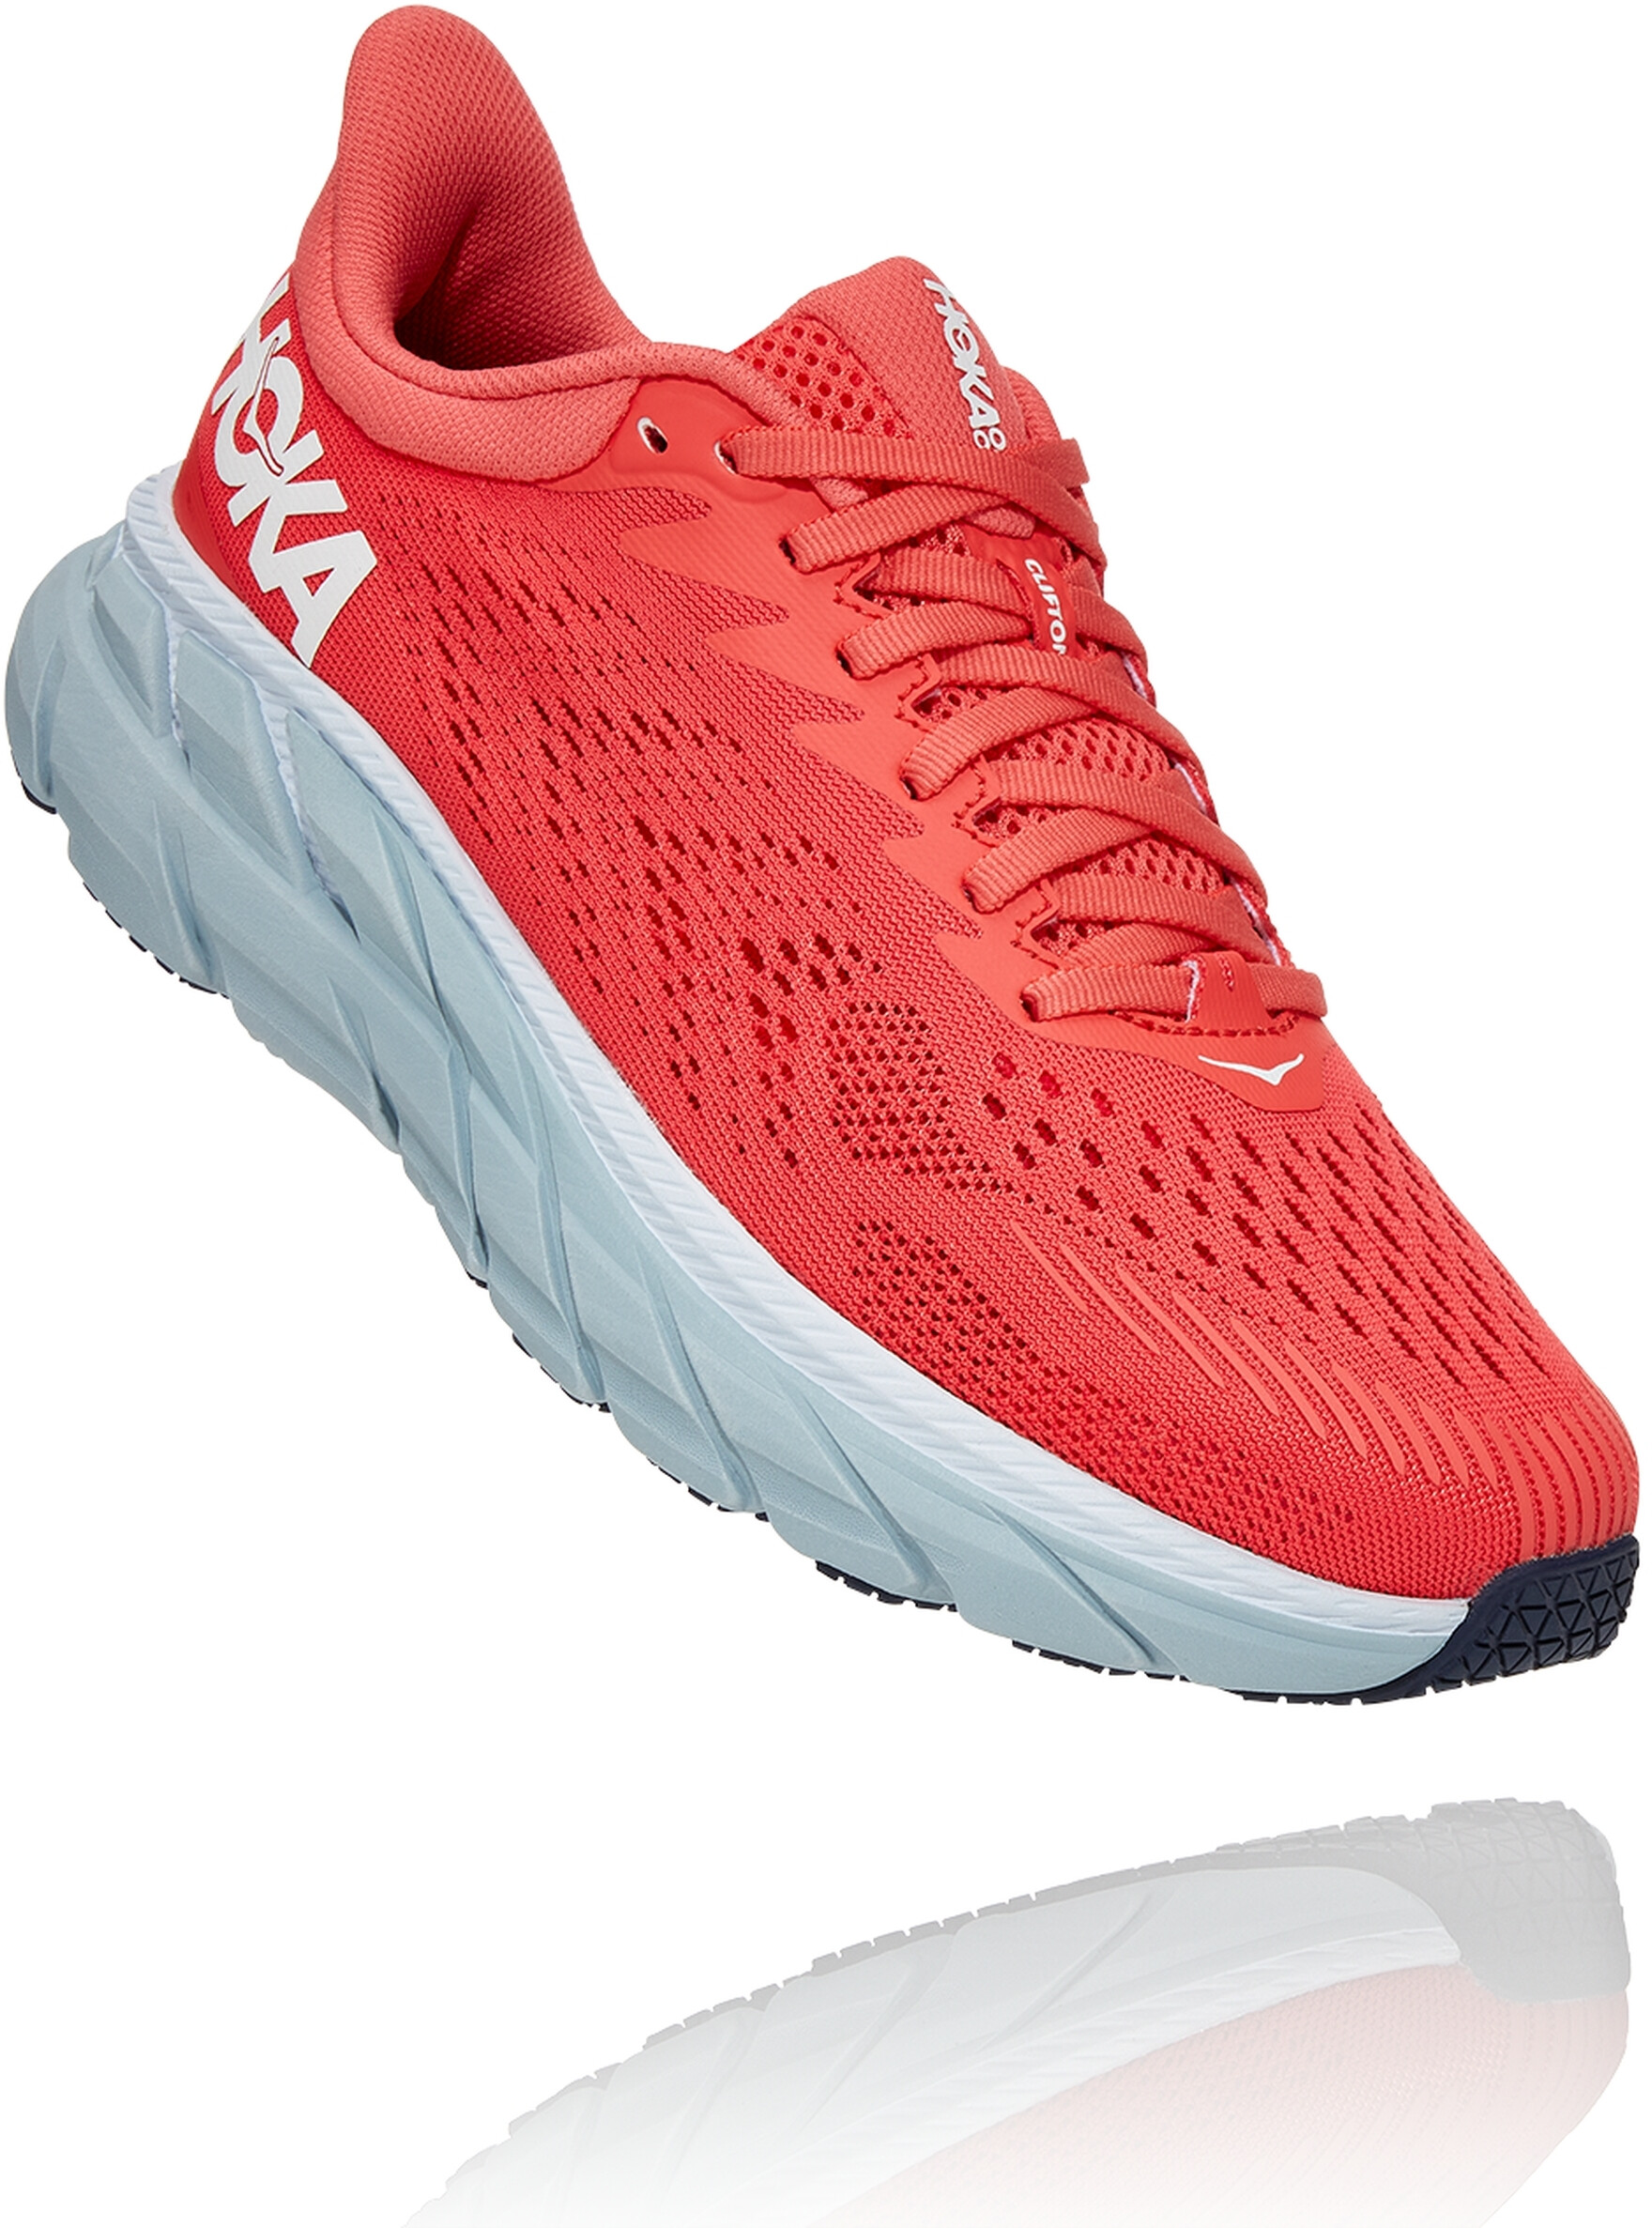 Hoka One One Clifton 7 Running Shoes Women hot coral/white at bikester ...